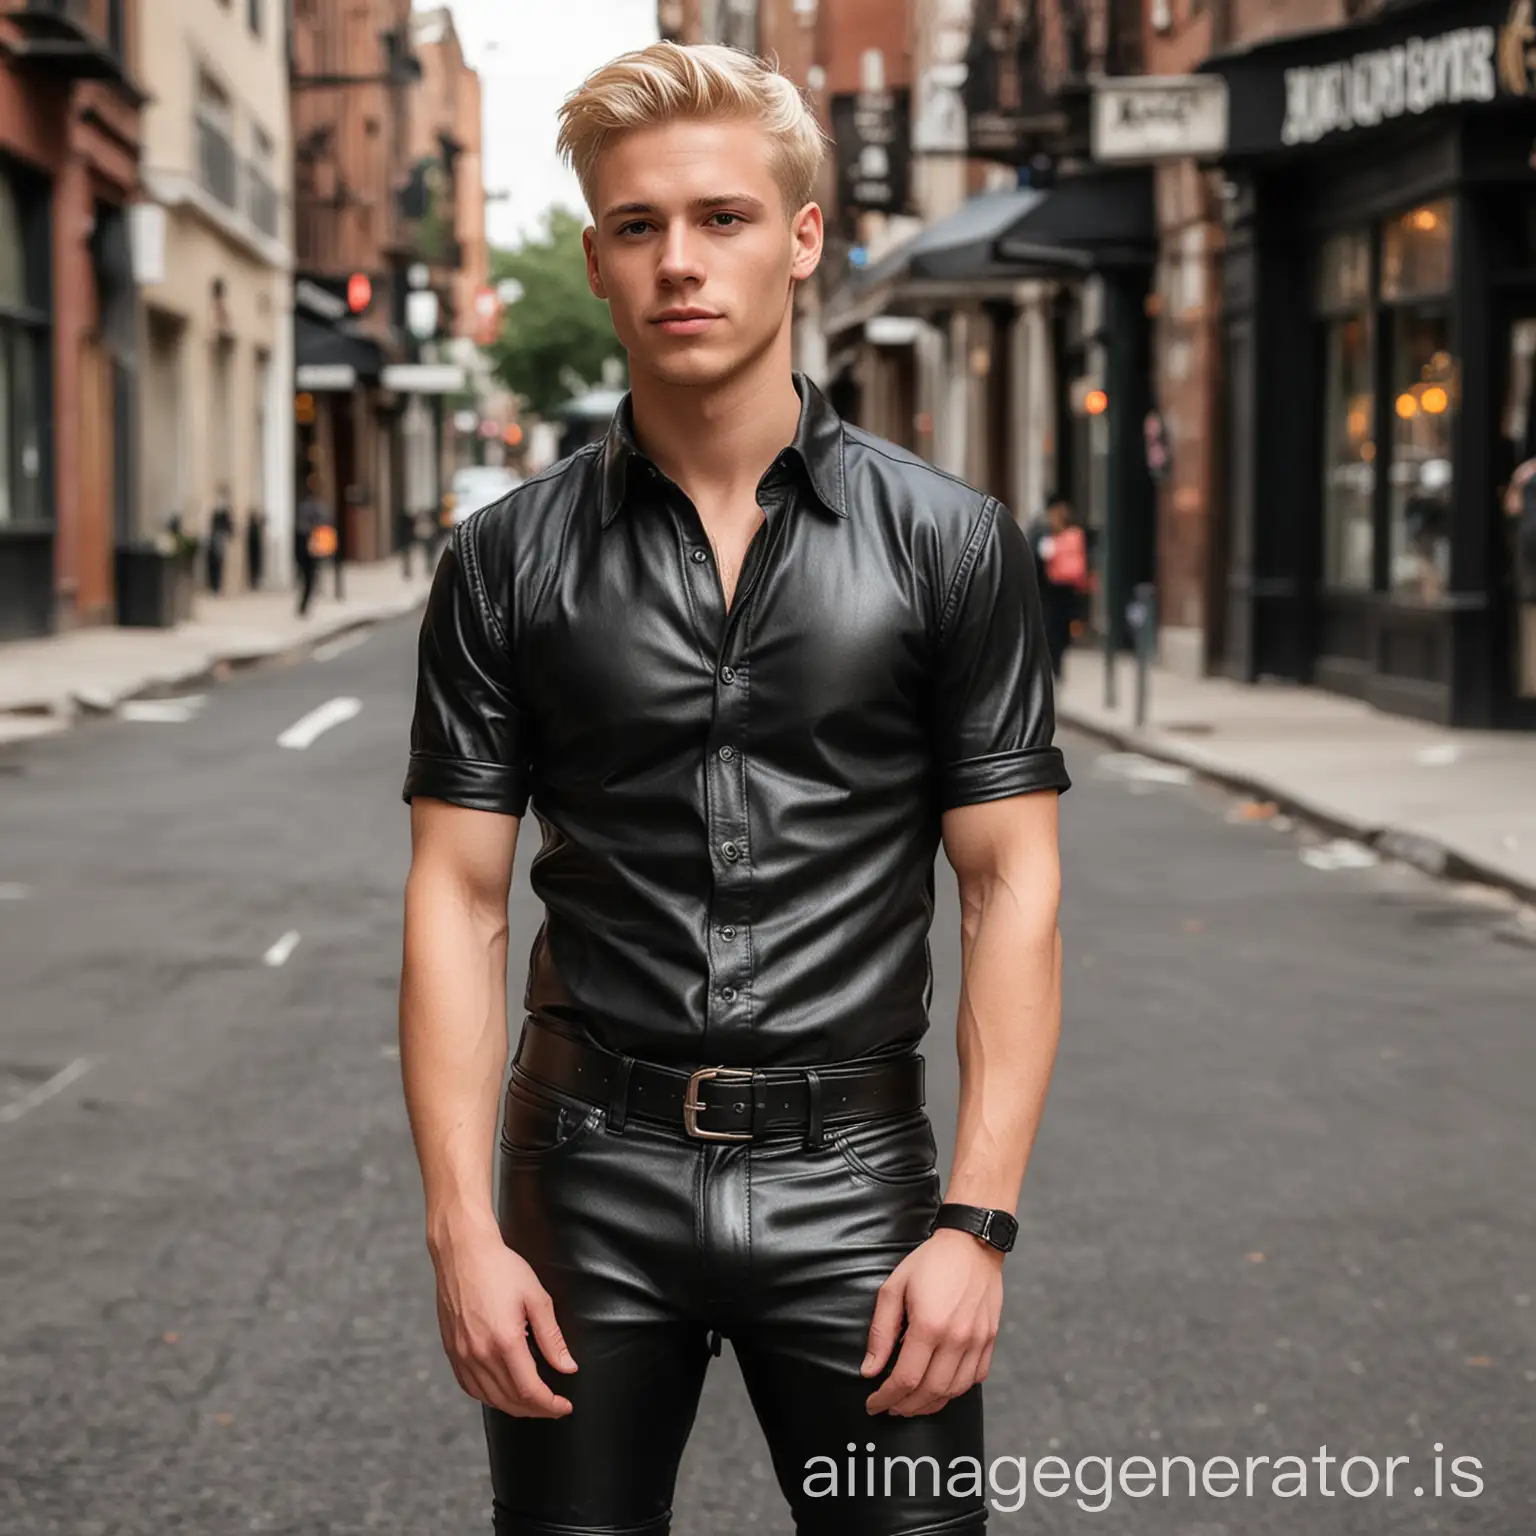 Young white man, athletic build, short blonde hair, wearing tight black leather pants, and short sleeved black leather shirt, poses on a street corner